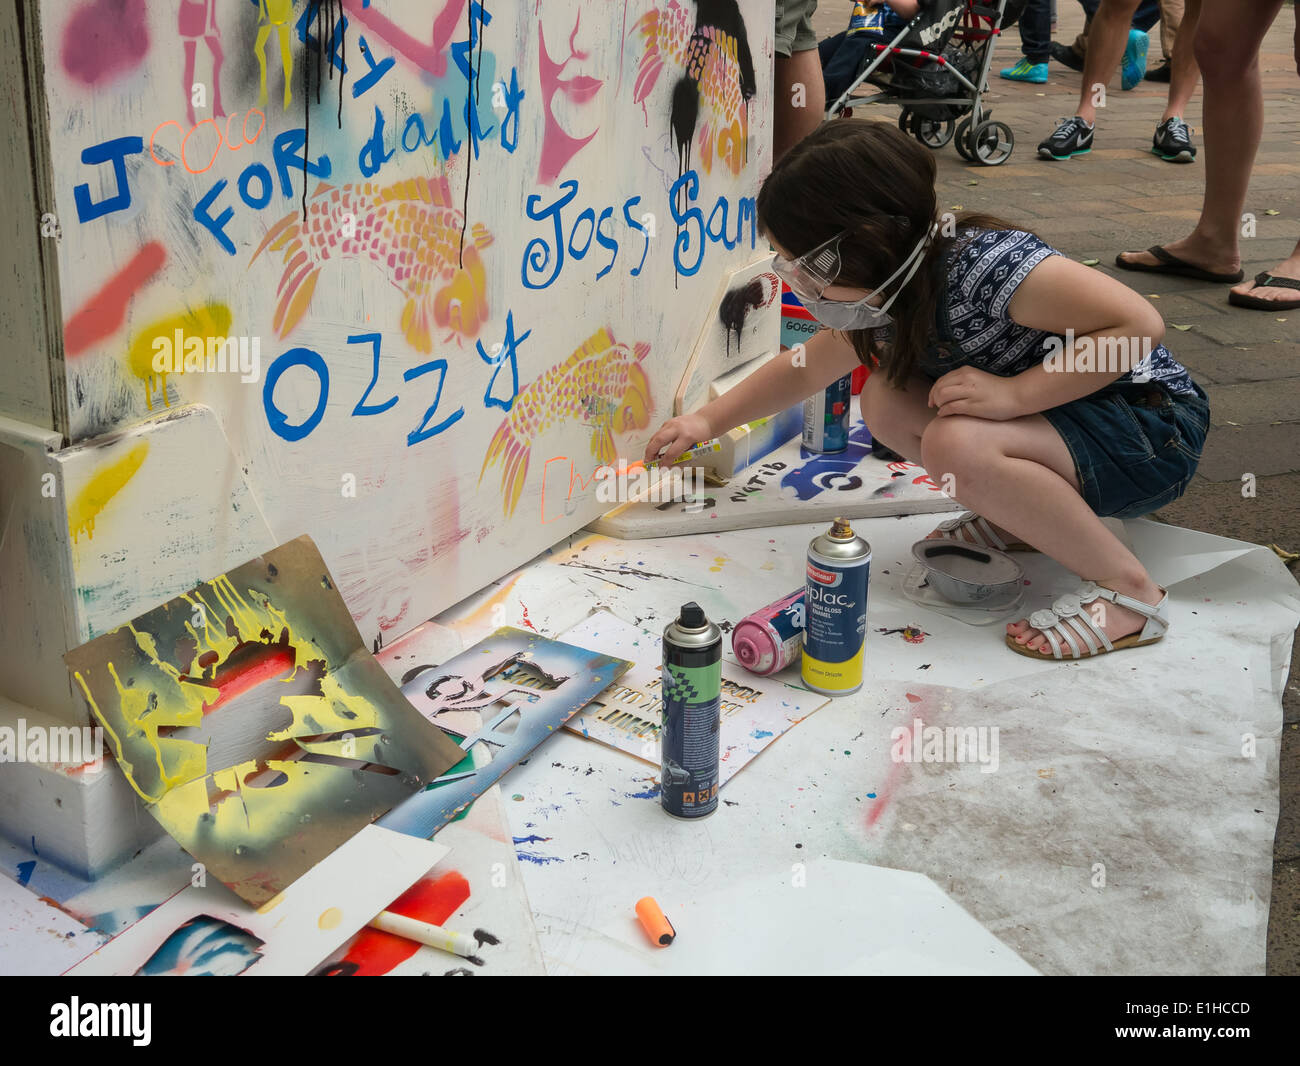 A young girl learns how to stencil using spray paint to make graffiti street art during the Portsmouth street games 2014 Stock Photo